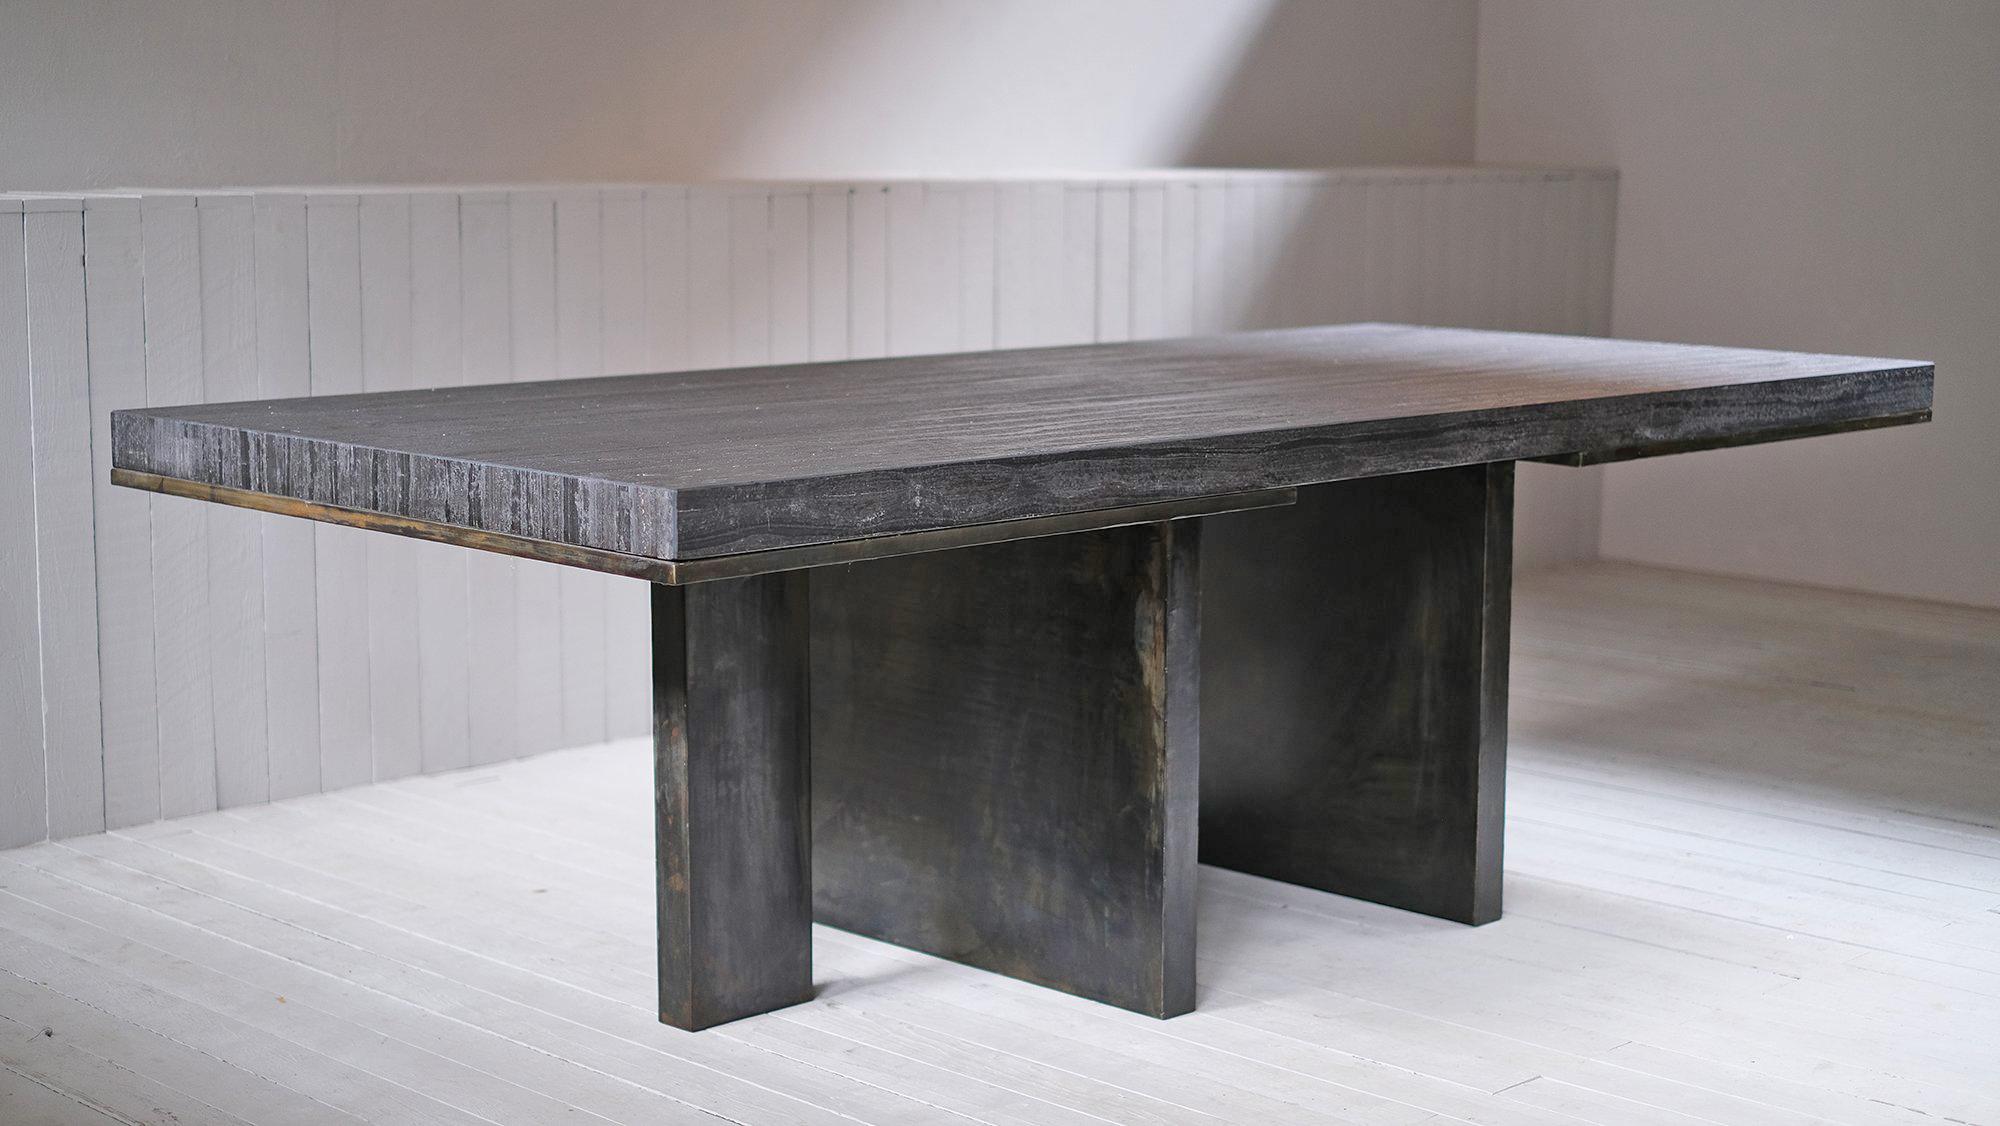 Contemporary dining table in marble & steel by Arno Declercq
Limited edition of 8

Dimensions: 
250 x 110h 75 cm
Measres: 98” x 43.3” x H 29.5”
Material: Patinated and raw steel combined with acid treated japanese black marble

Made by hand,